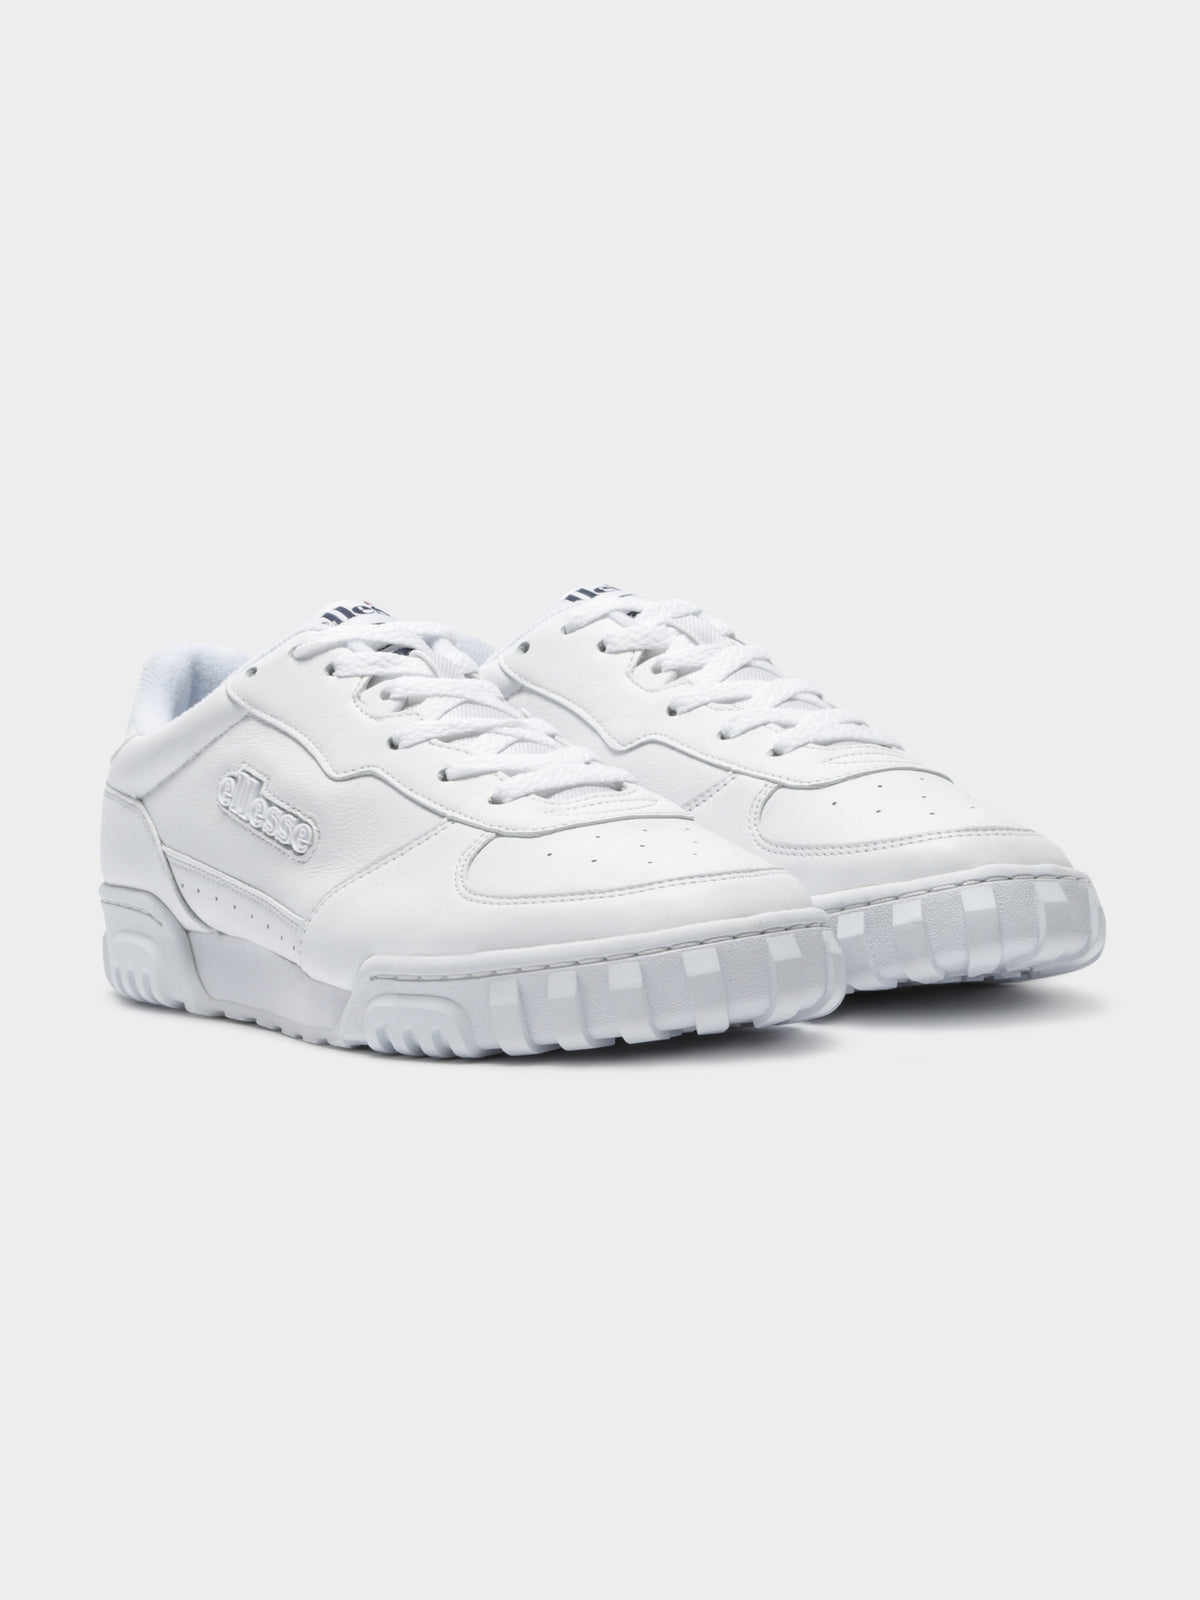 Tanker Lo Leather Sneakers in White